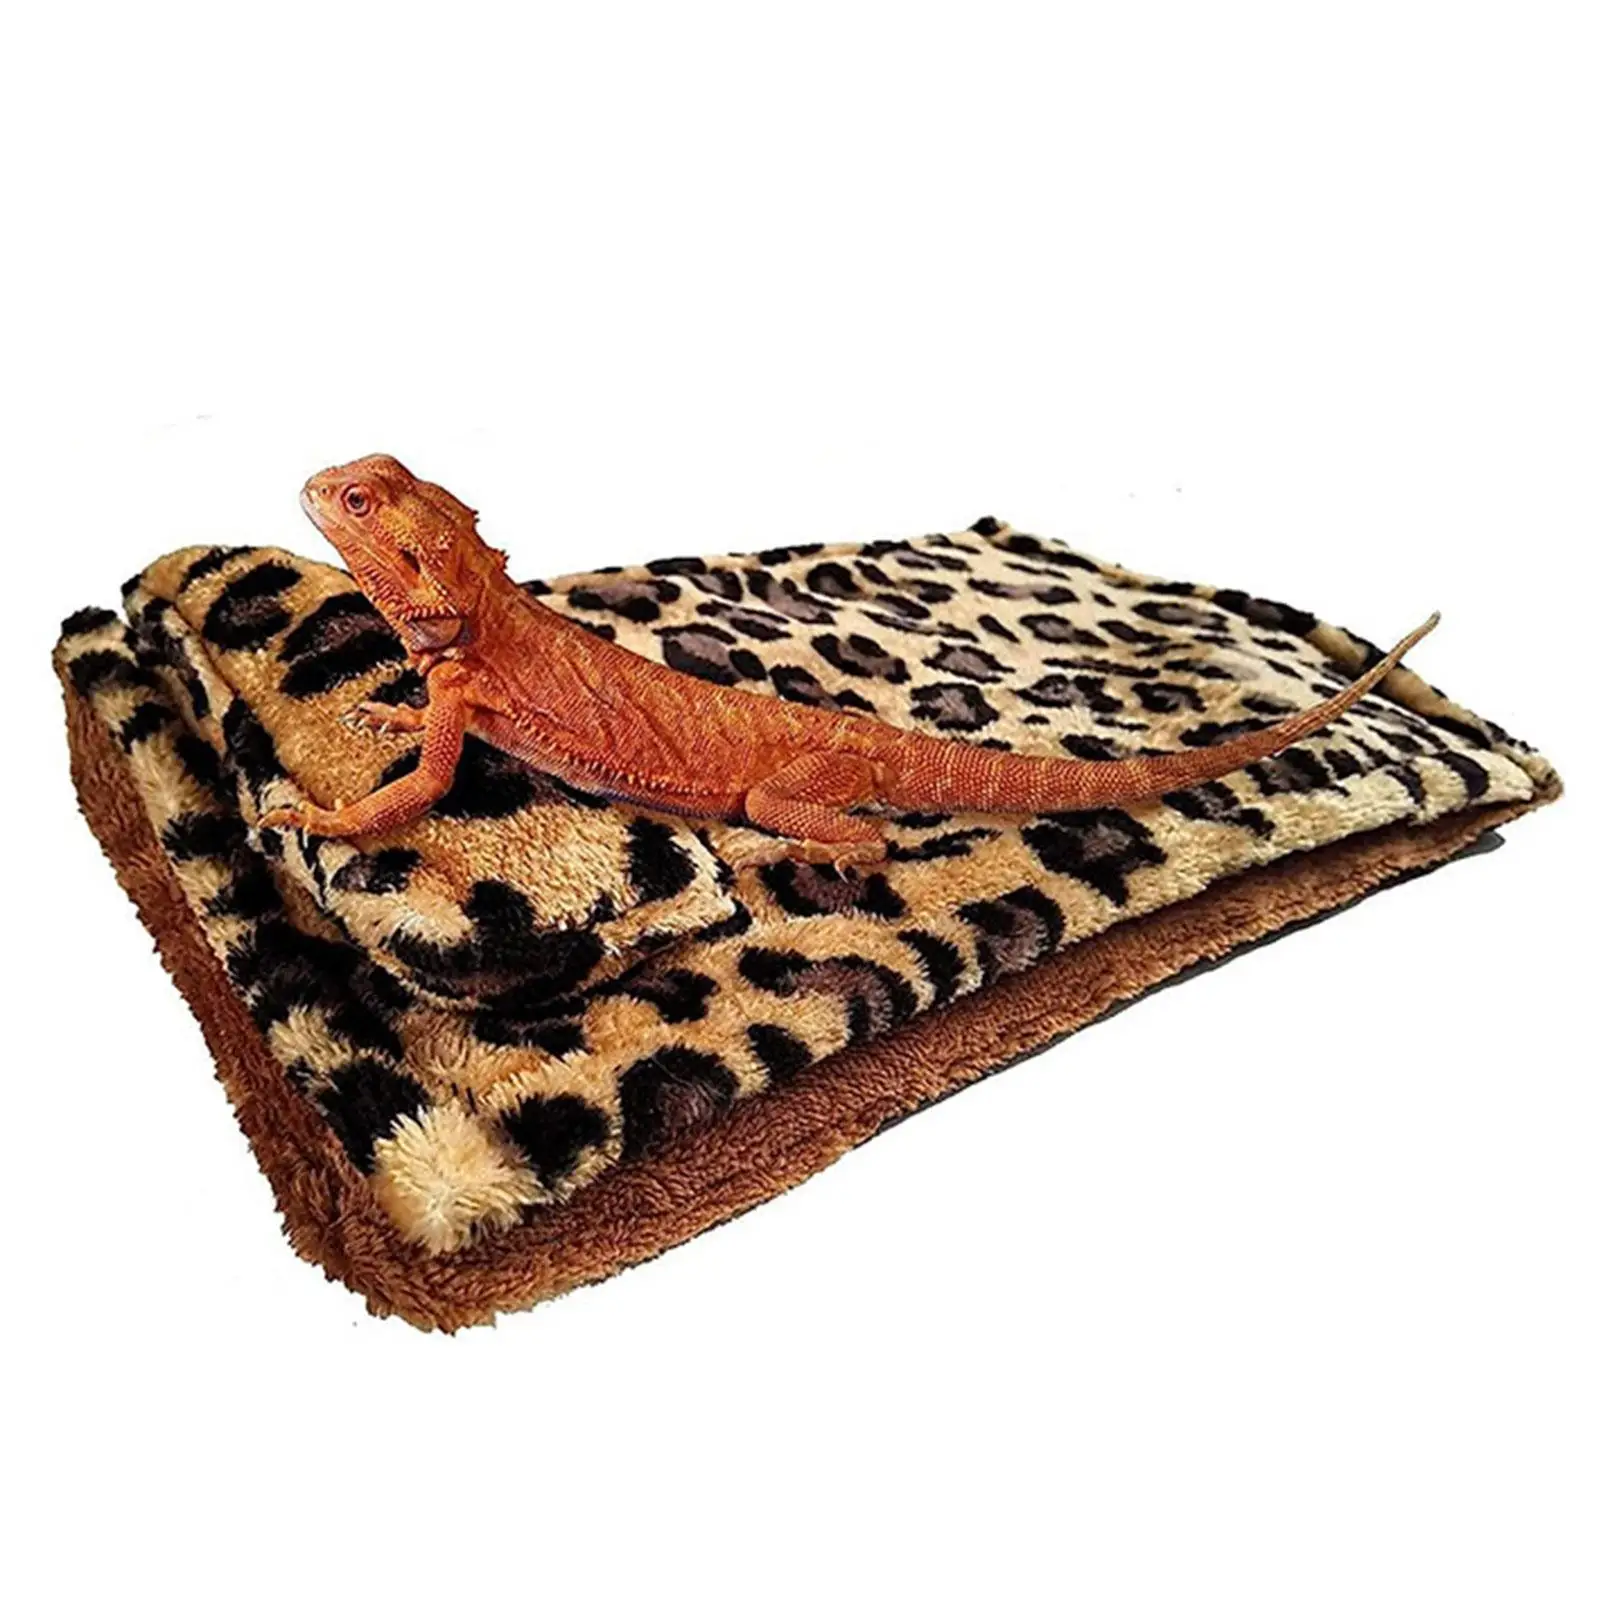 Reptile Sleeping Bag with Pillow and Blanket Warm Small Animal Sleeping Bag Set Bearded Dragon Bed for Leopard Gecko Small Pets